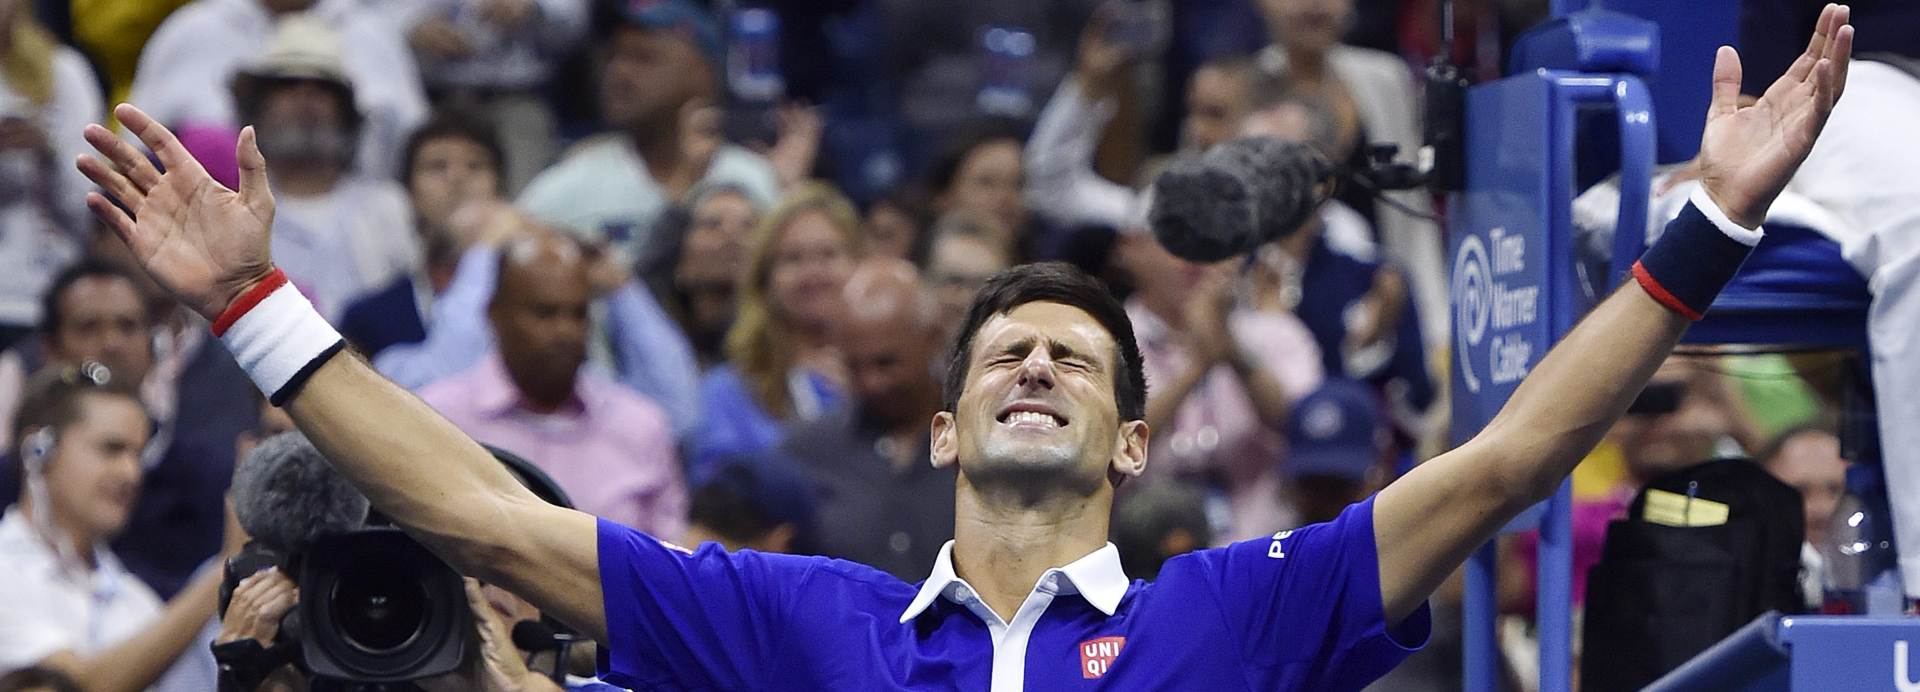 epa04929464 Novak Djokovic of Serbia reacts after defeating Roger Federer of Switzerland to win the men's final on the fourteenth day of the 2015 US Open Tennis Championship at the USTA National Tennis Center in Flushing Meadows, New York, USA, 13 September 2015. The US Open runs through 13 September, which is a return to a 14-day schedule.  EPA/JUSTIN LANE